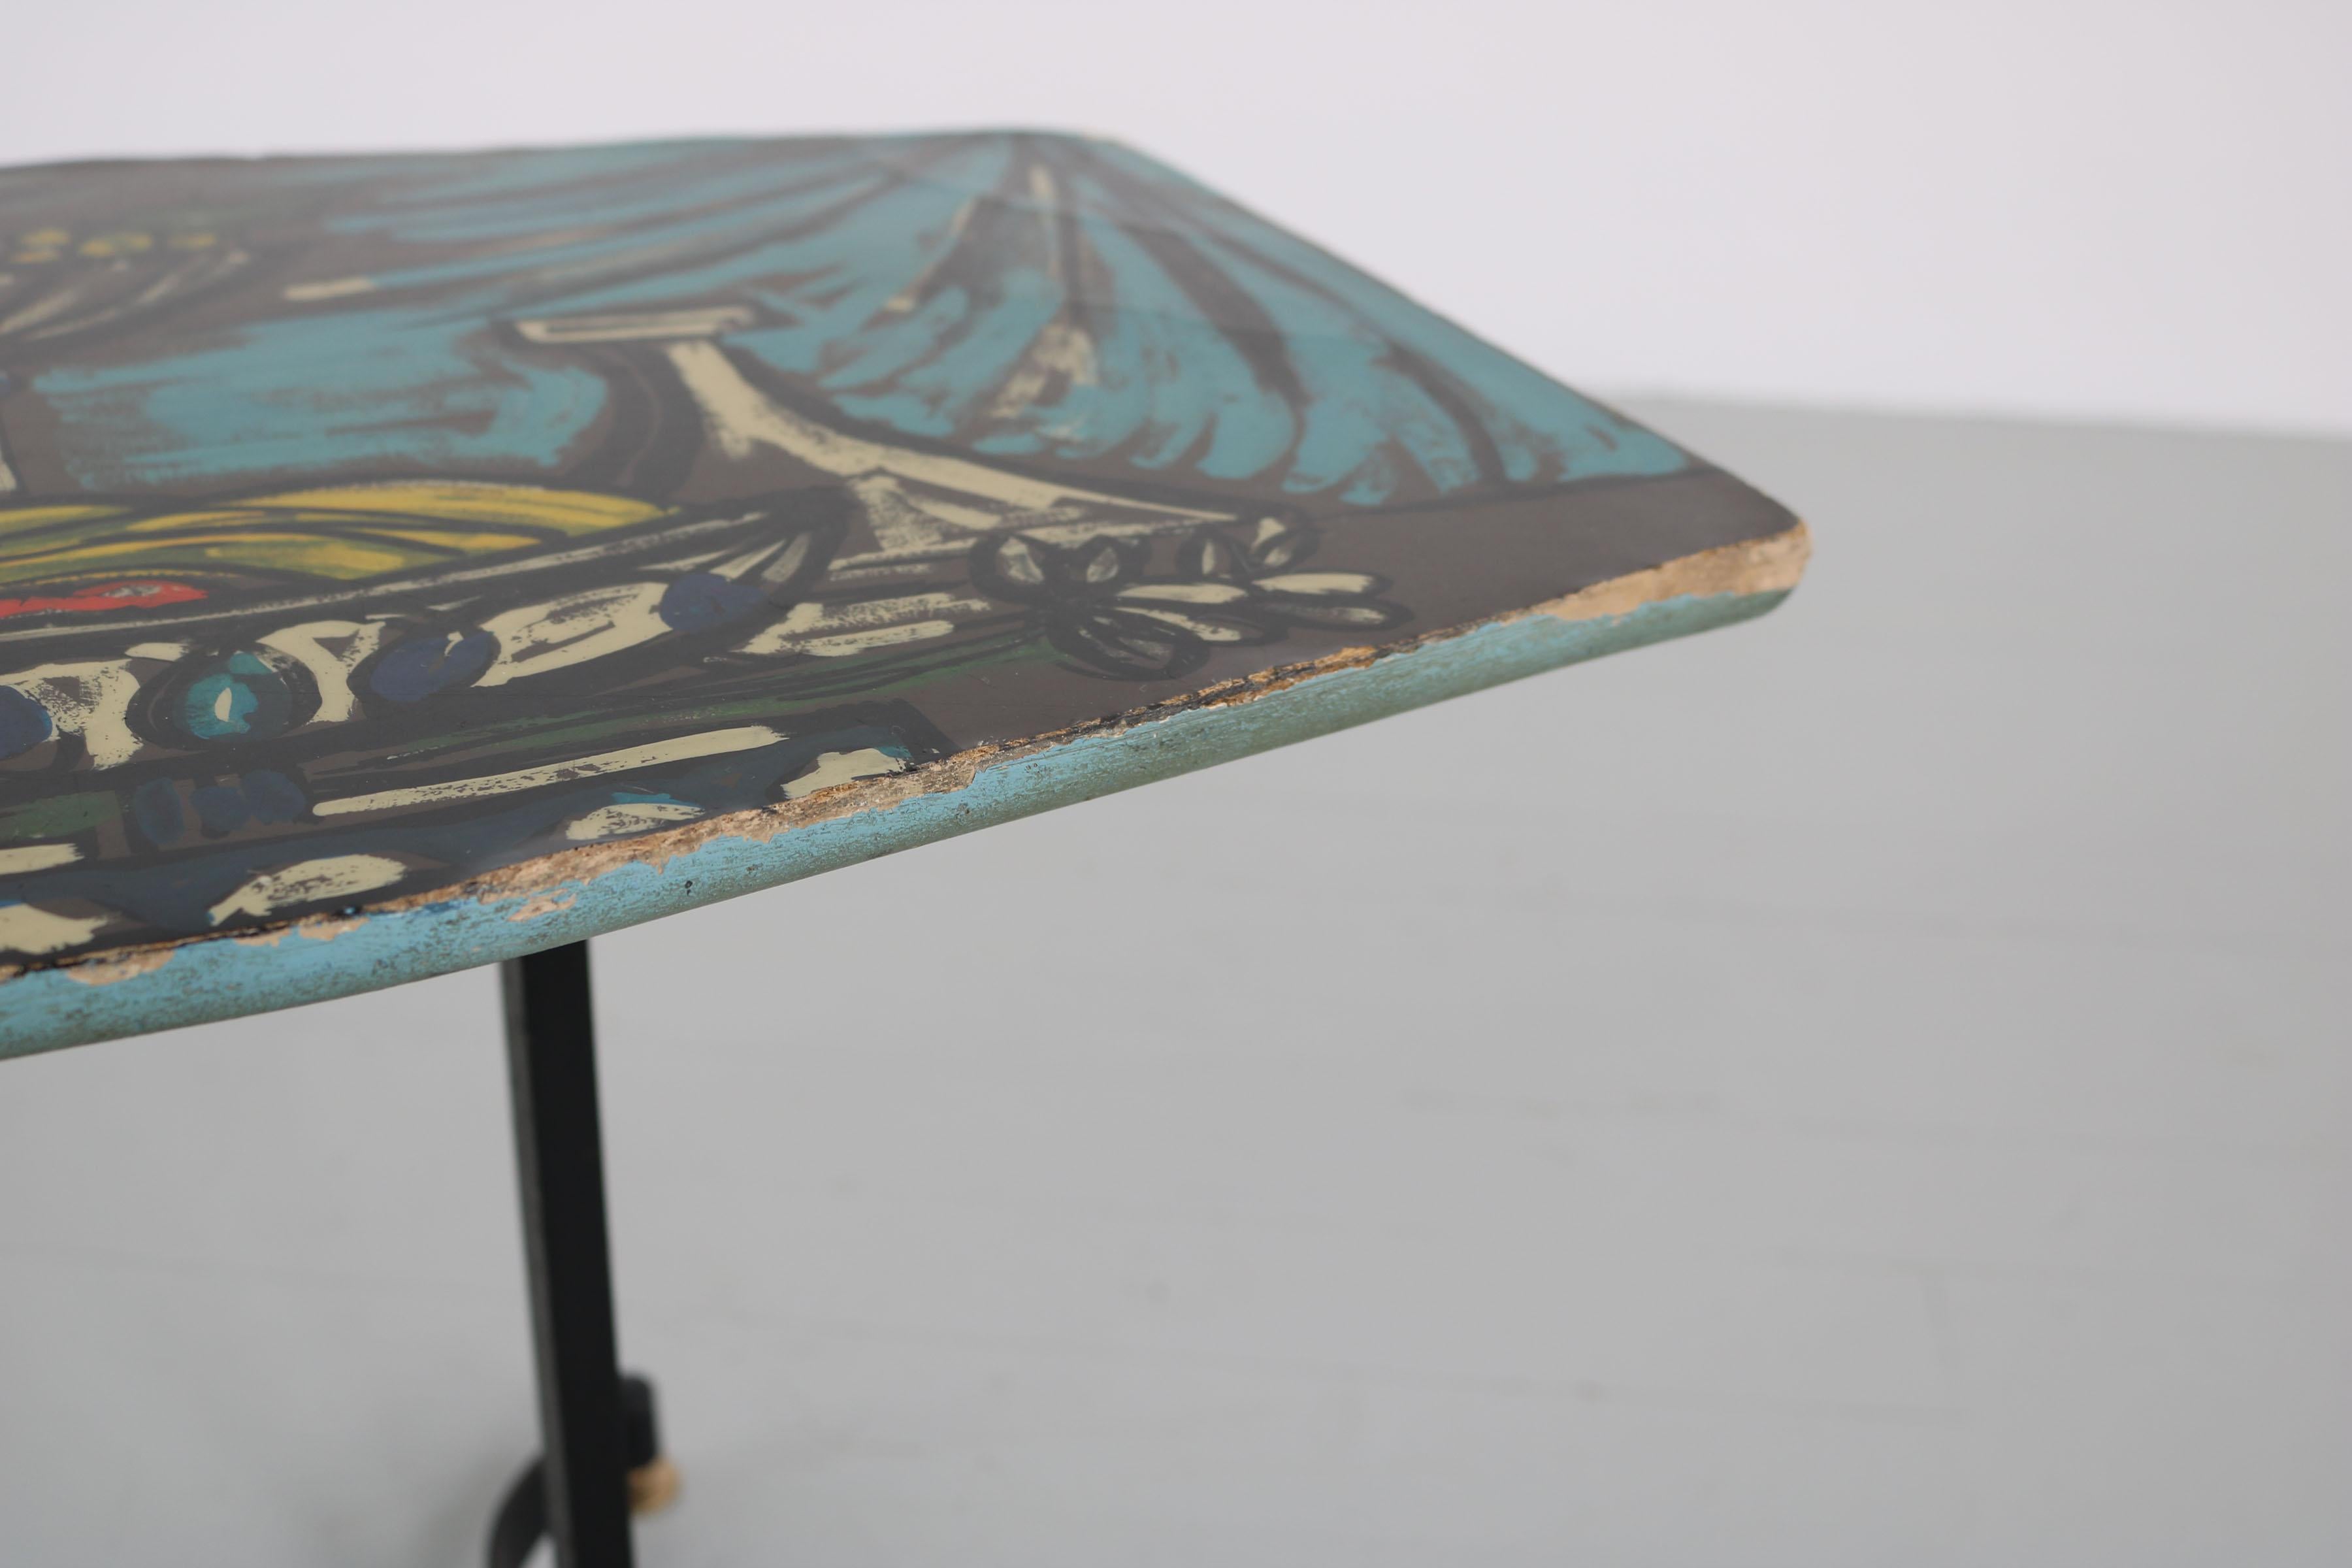 Italian Dark Sofa Table with Colorful Hand Painted Motives on Table Top, 1950s For Sale 4